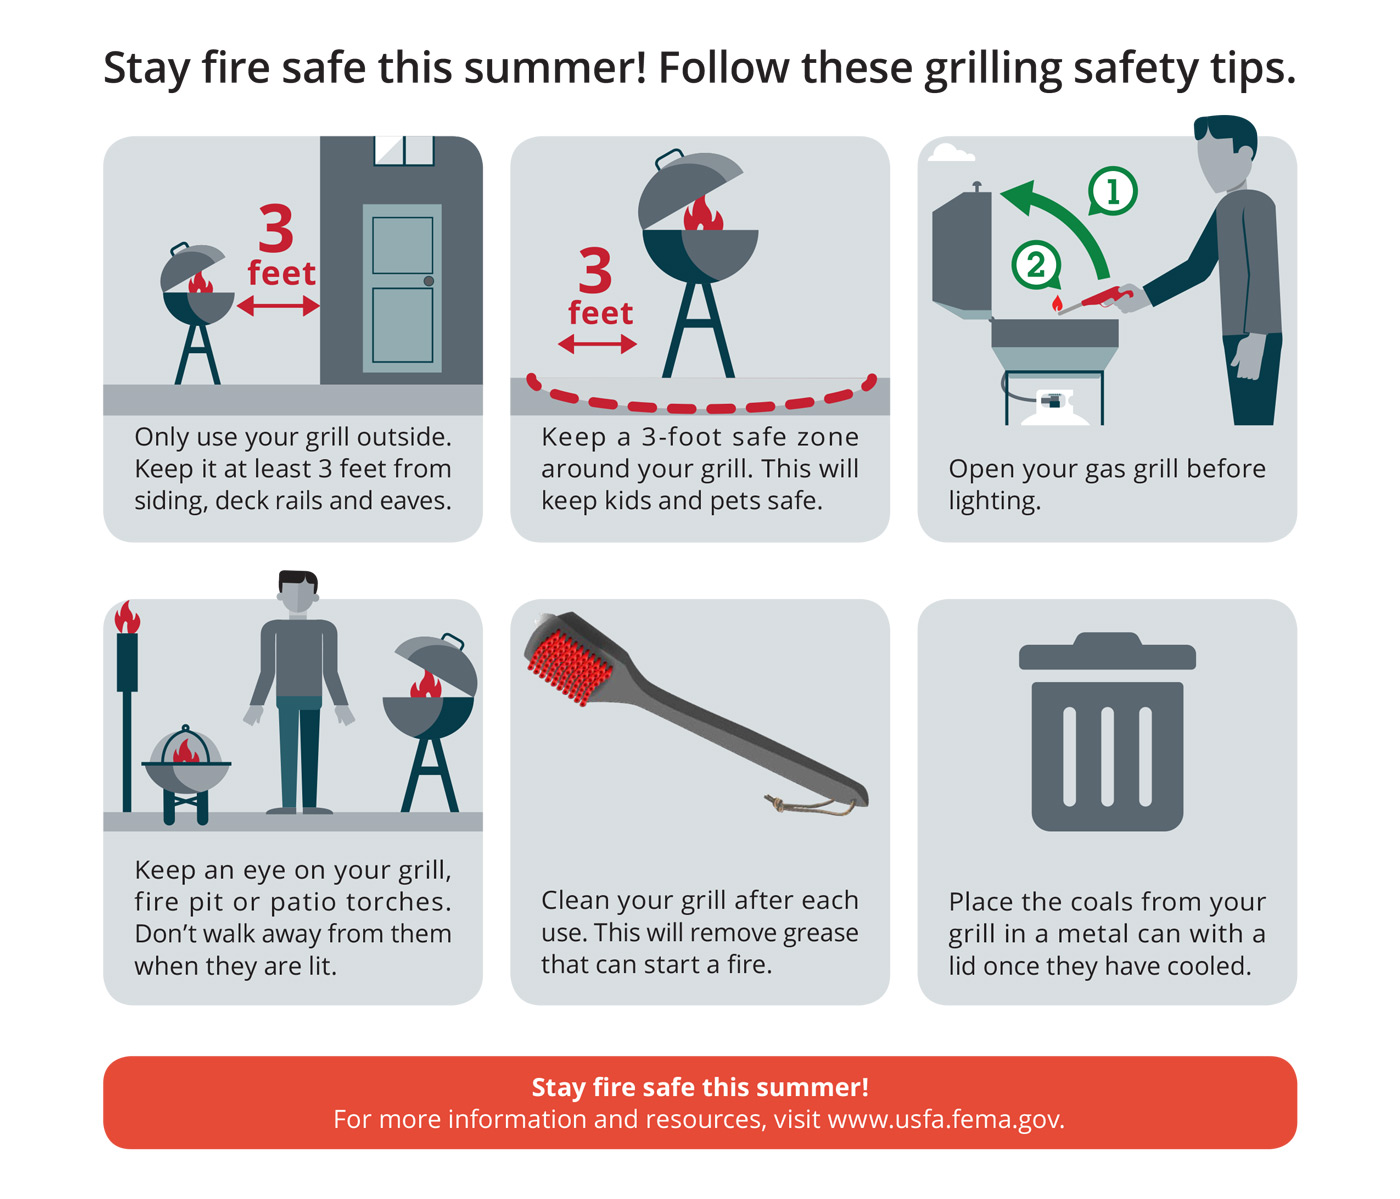 Stay fire safe this summer! Follow these grilling safety tips from the Federal Emergency Management Agency and the U.S. Fire Administration. Only use your grill outside. Keep it at least 3 feet from siding, deck rails, and eaves. Keep a 3-foot safe zone around your grill. This will keep kids and pets safe. Open your gas grill before lighting. Keep an eye on your grill, fire pit, or patio torches. Don’t walk away from them when they are lit. Clean your grill after each user. This will remove grease that can start a fire. Place the coals from your grill in a metal can with a lid once they have cooled.